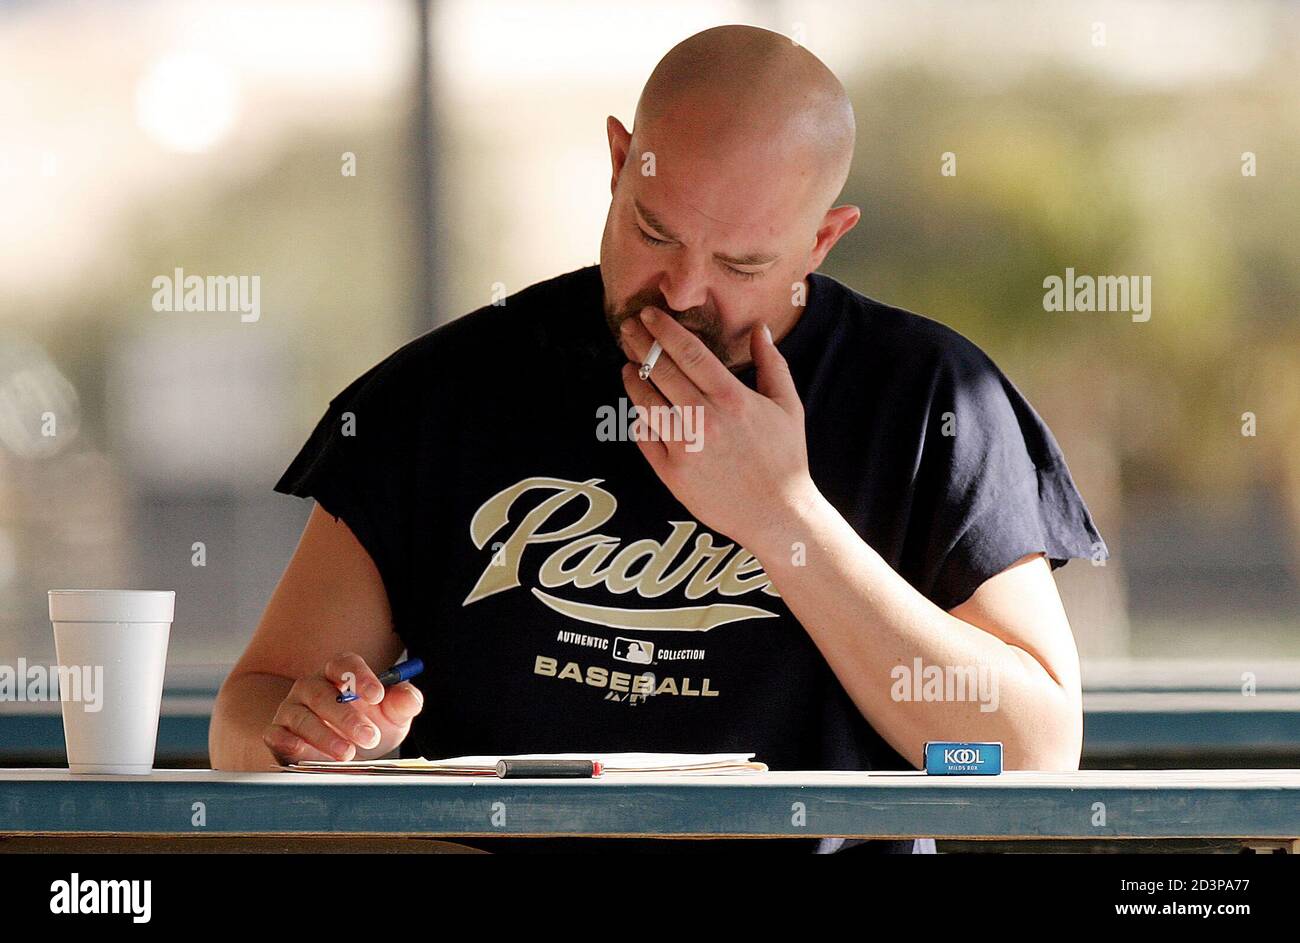 San Diego Padres pitcher Rod Beck fills out an injury history form during the team's physicals for pitchers and catchers, at their spring training facility in Peoria, Arizona February 21, 2004. REUTERS/Jeff Topping  JT/GN Stock Photo